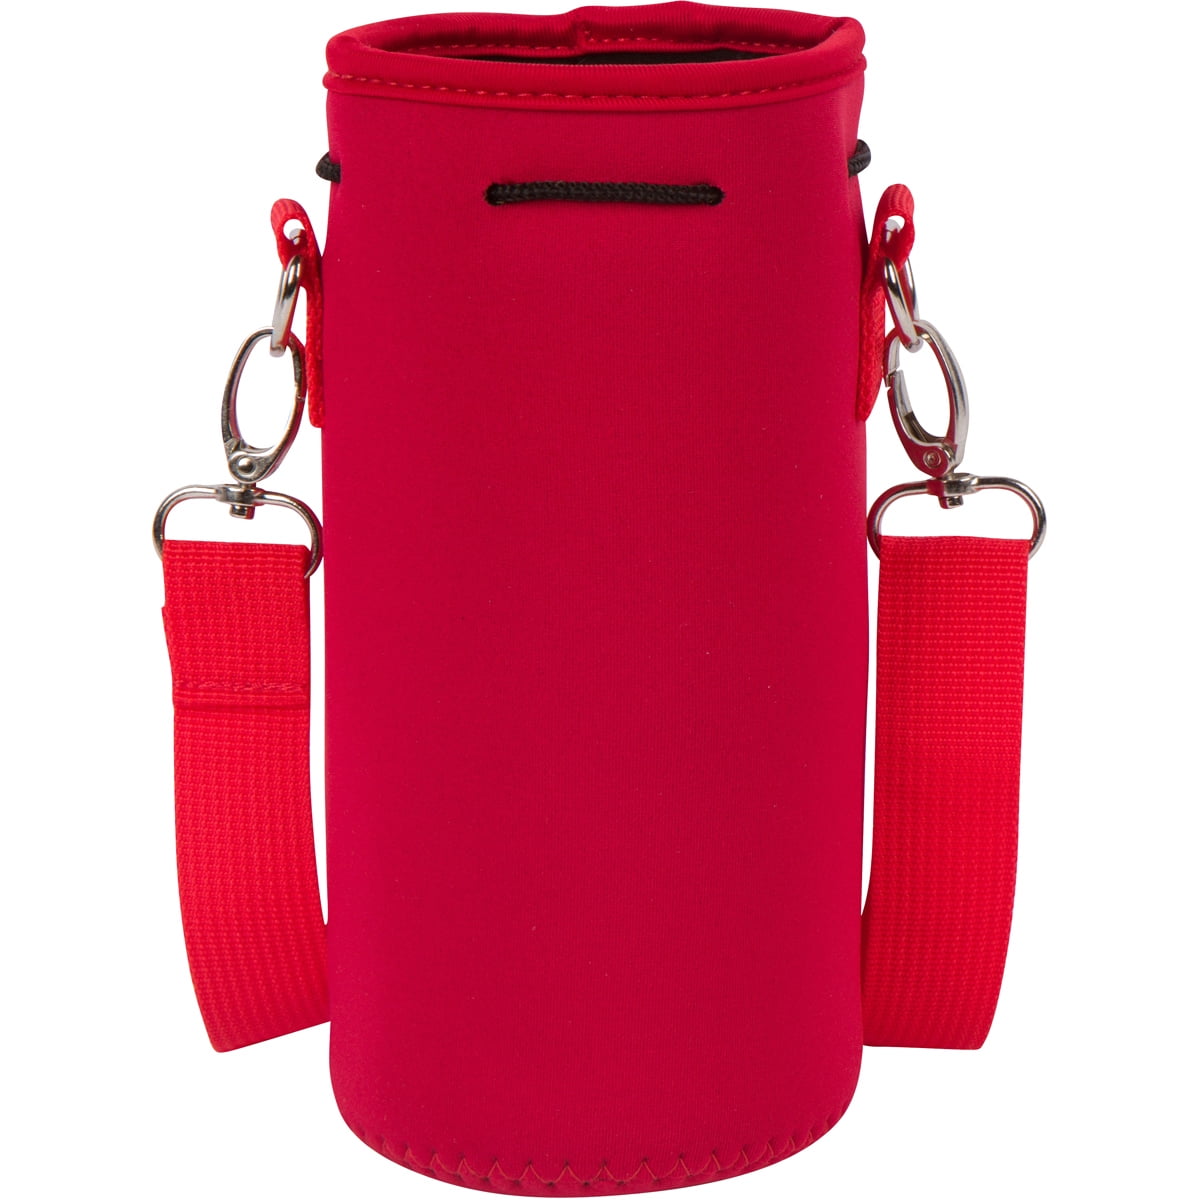 Buy Non-silicone Bottle Sleeve Water Bottle Cooling Sleeve Neoprene Cloth Bottle  Holder Bag Strap from Guangdong Shangda Sports Products Co., Ltd., China